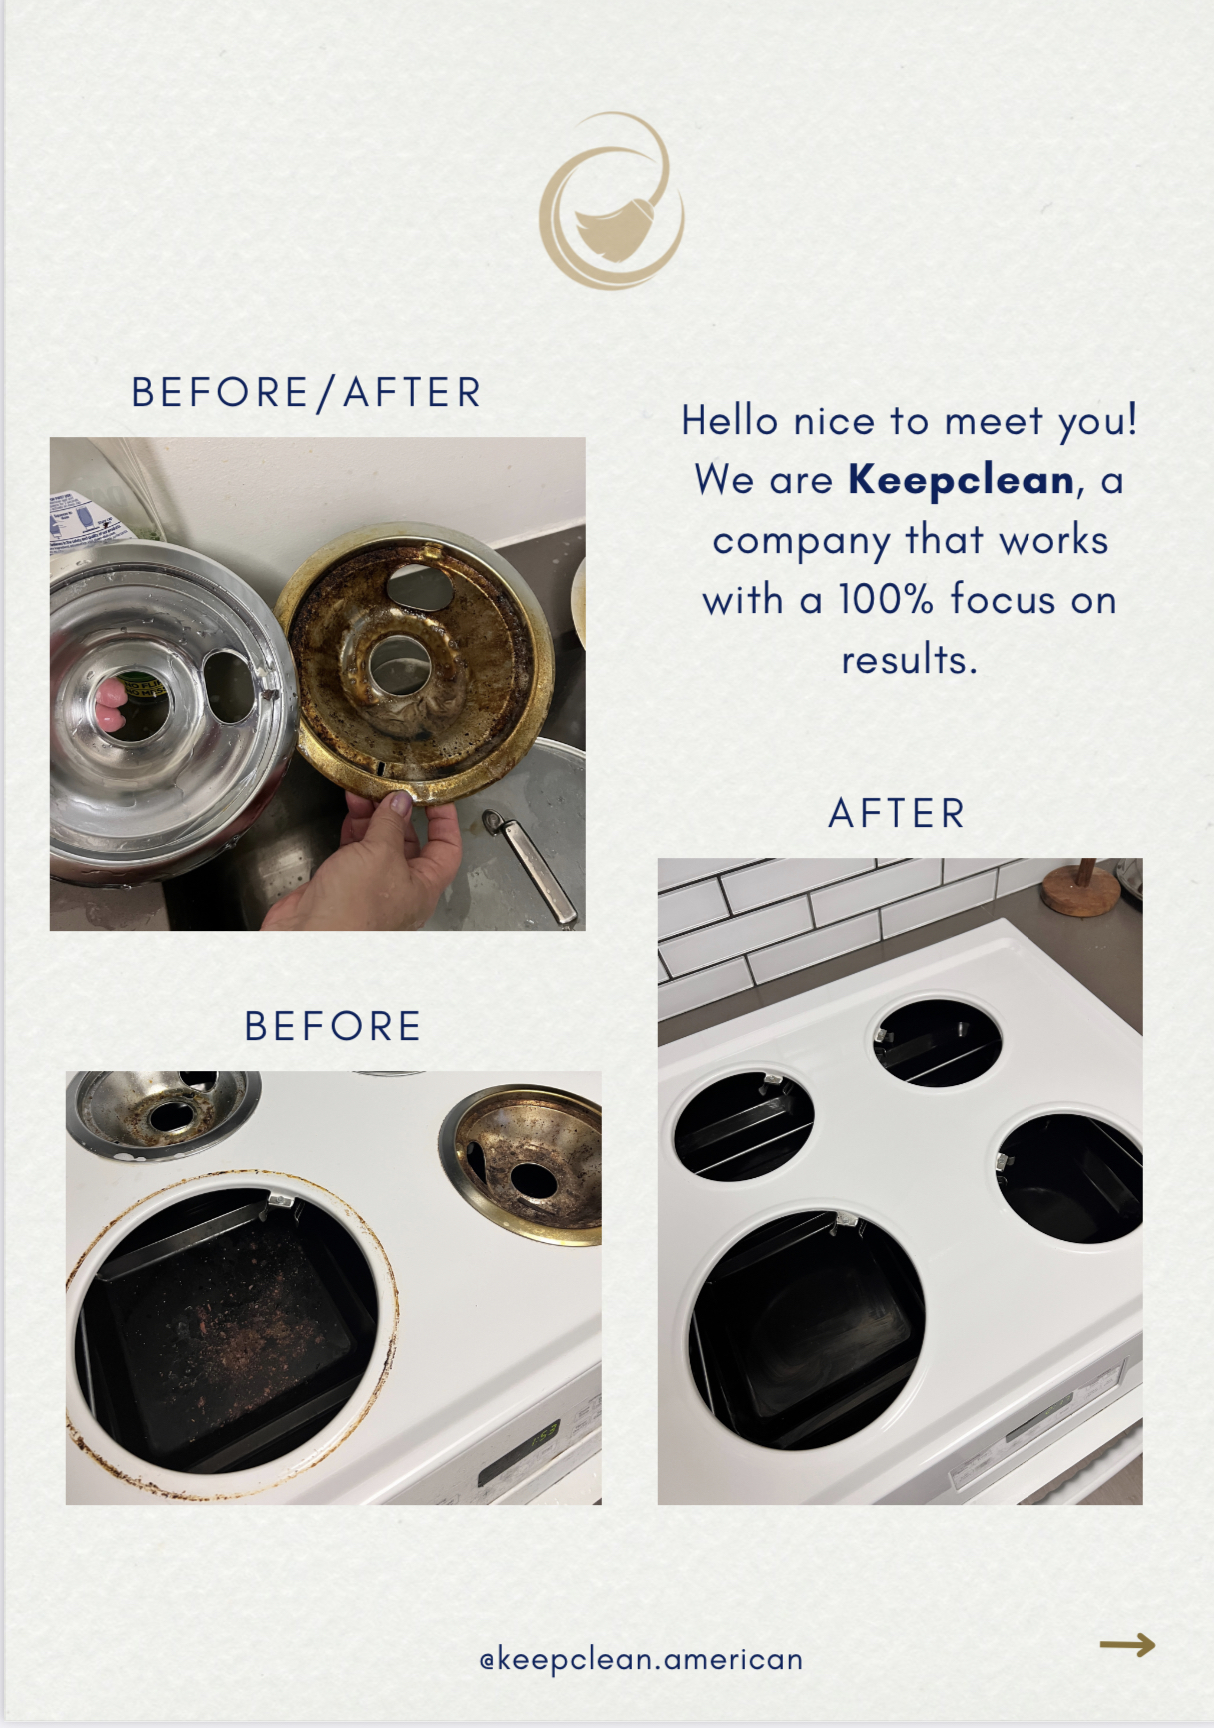 BEFORE/AFTER :
Hello nice to meet you!

  
 
 
  

We are Keepclean, a

company that works

with a 100% focus on
results.

ekeepclean.american